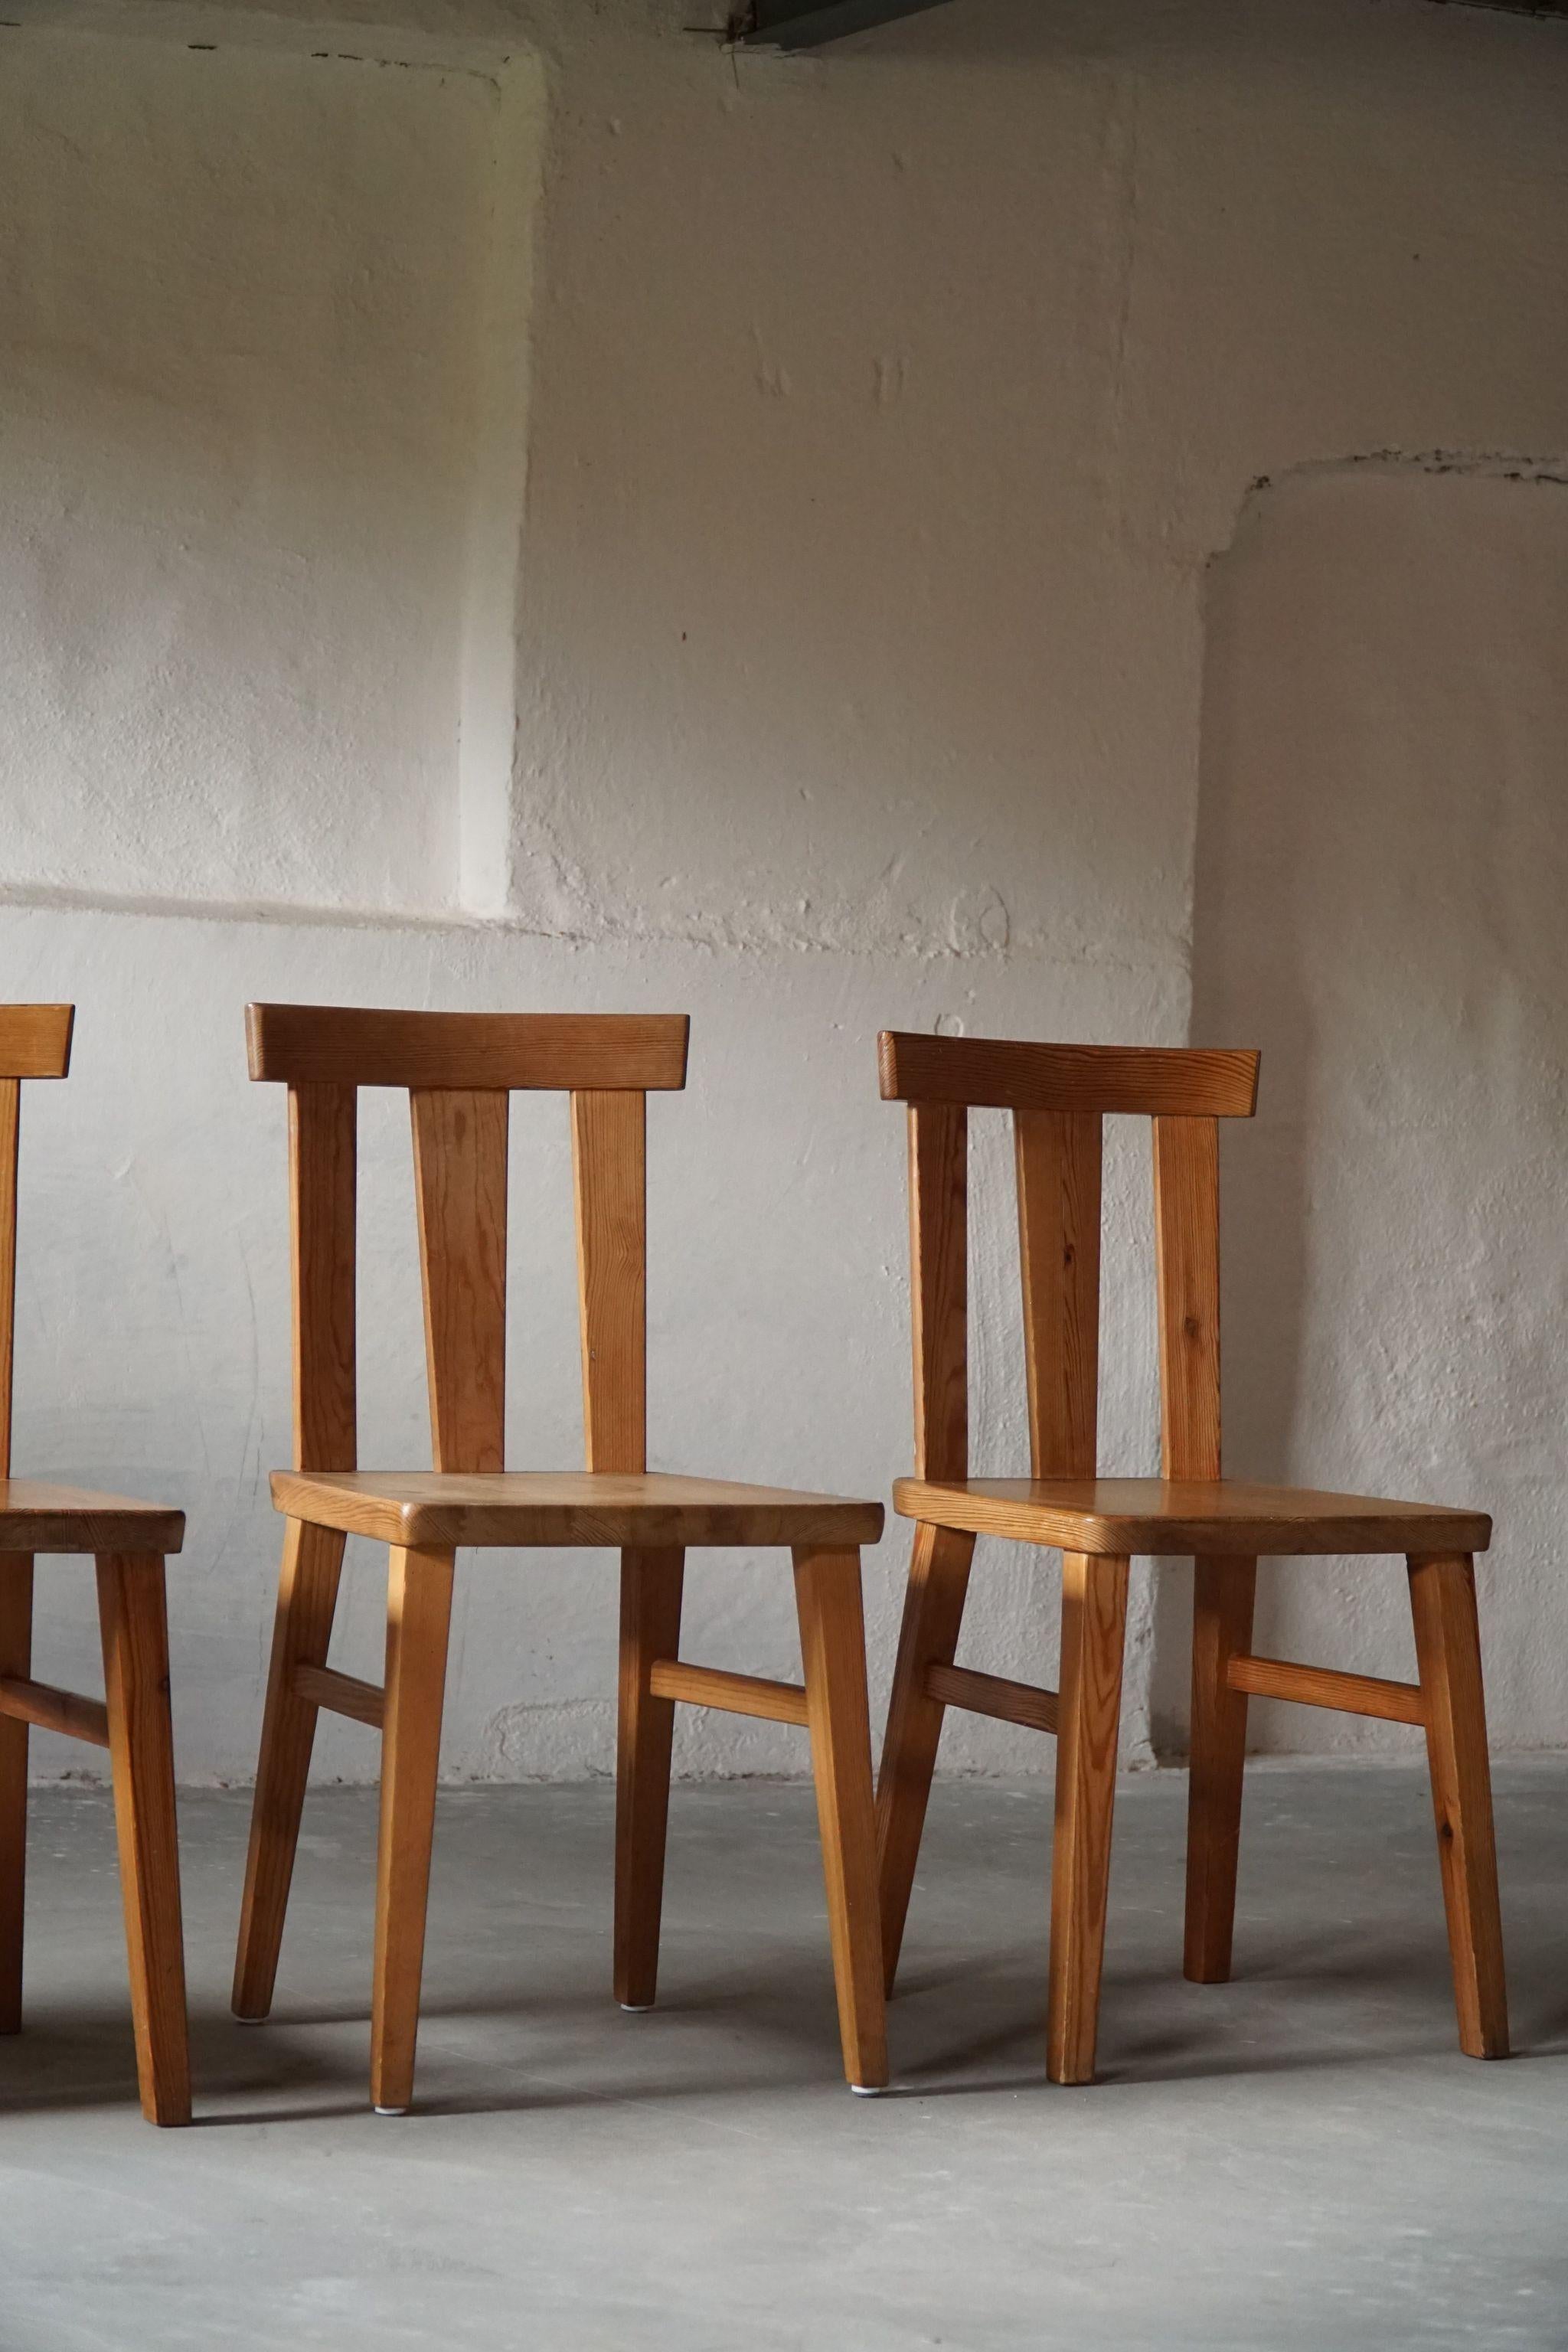 Set of 4 Swedish Modern Chairs in Solid Pine, Axel Einar Hjorth Style, 1930s For Sale 10